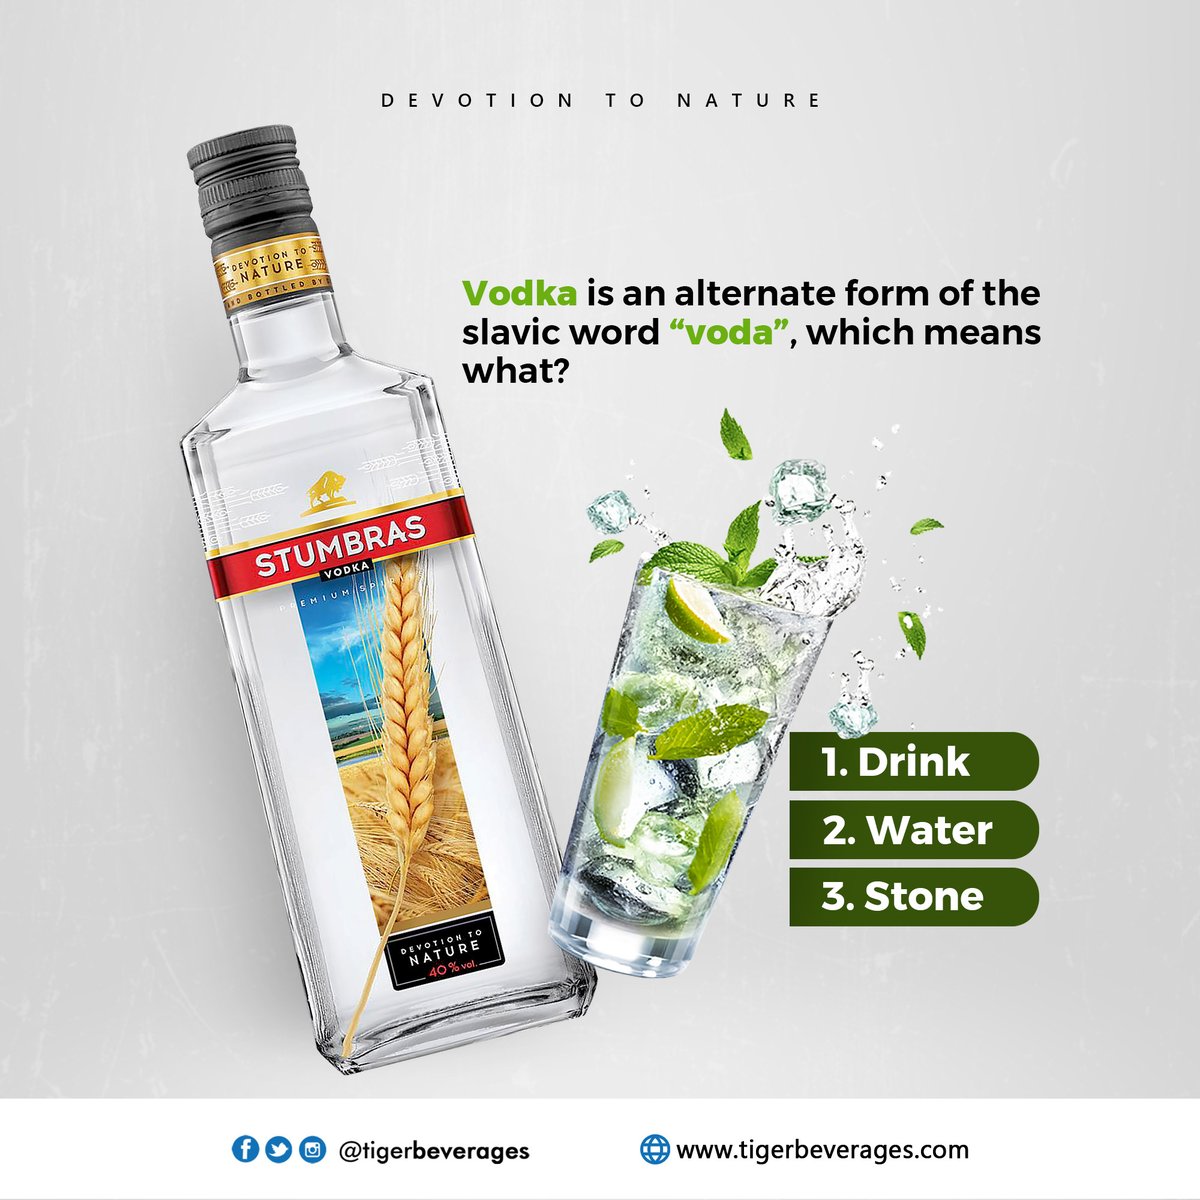 Because it's #ThursdayTrivia and we love good knowledge, what does the word 'voda' mean?
1. Drink
2. Water
3. Stone

We want to check something😁

#Stumbras #StumbrasVodka #Vodka #StumbrasCentenary
#Toast #SparklingMoments #Love #Fun #Friends #Spirits #Vodkalovers